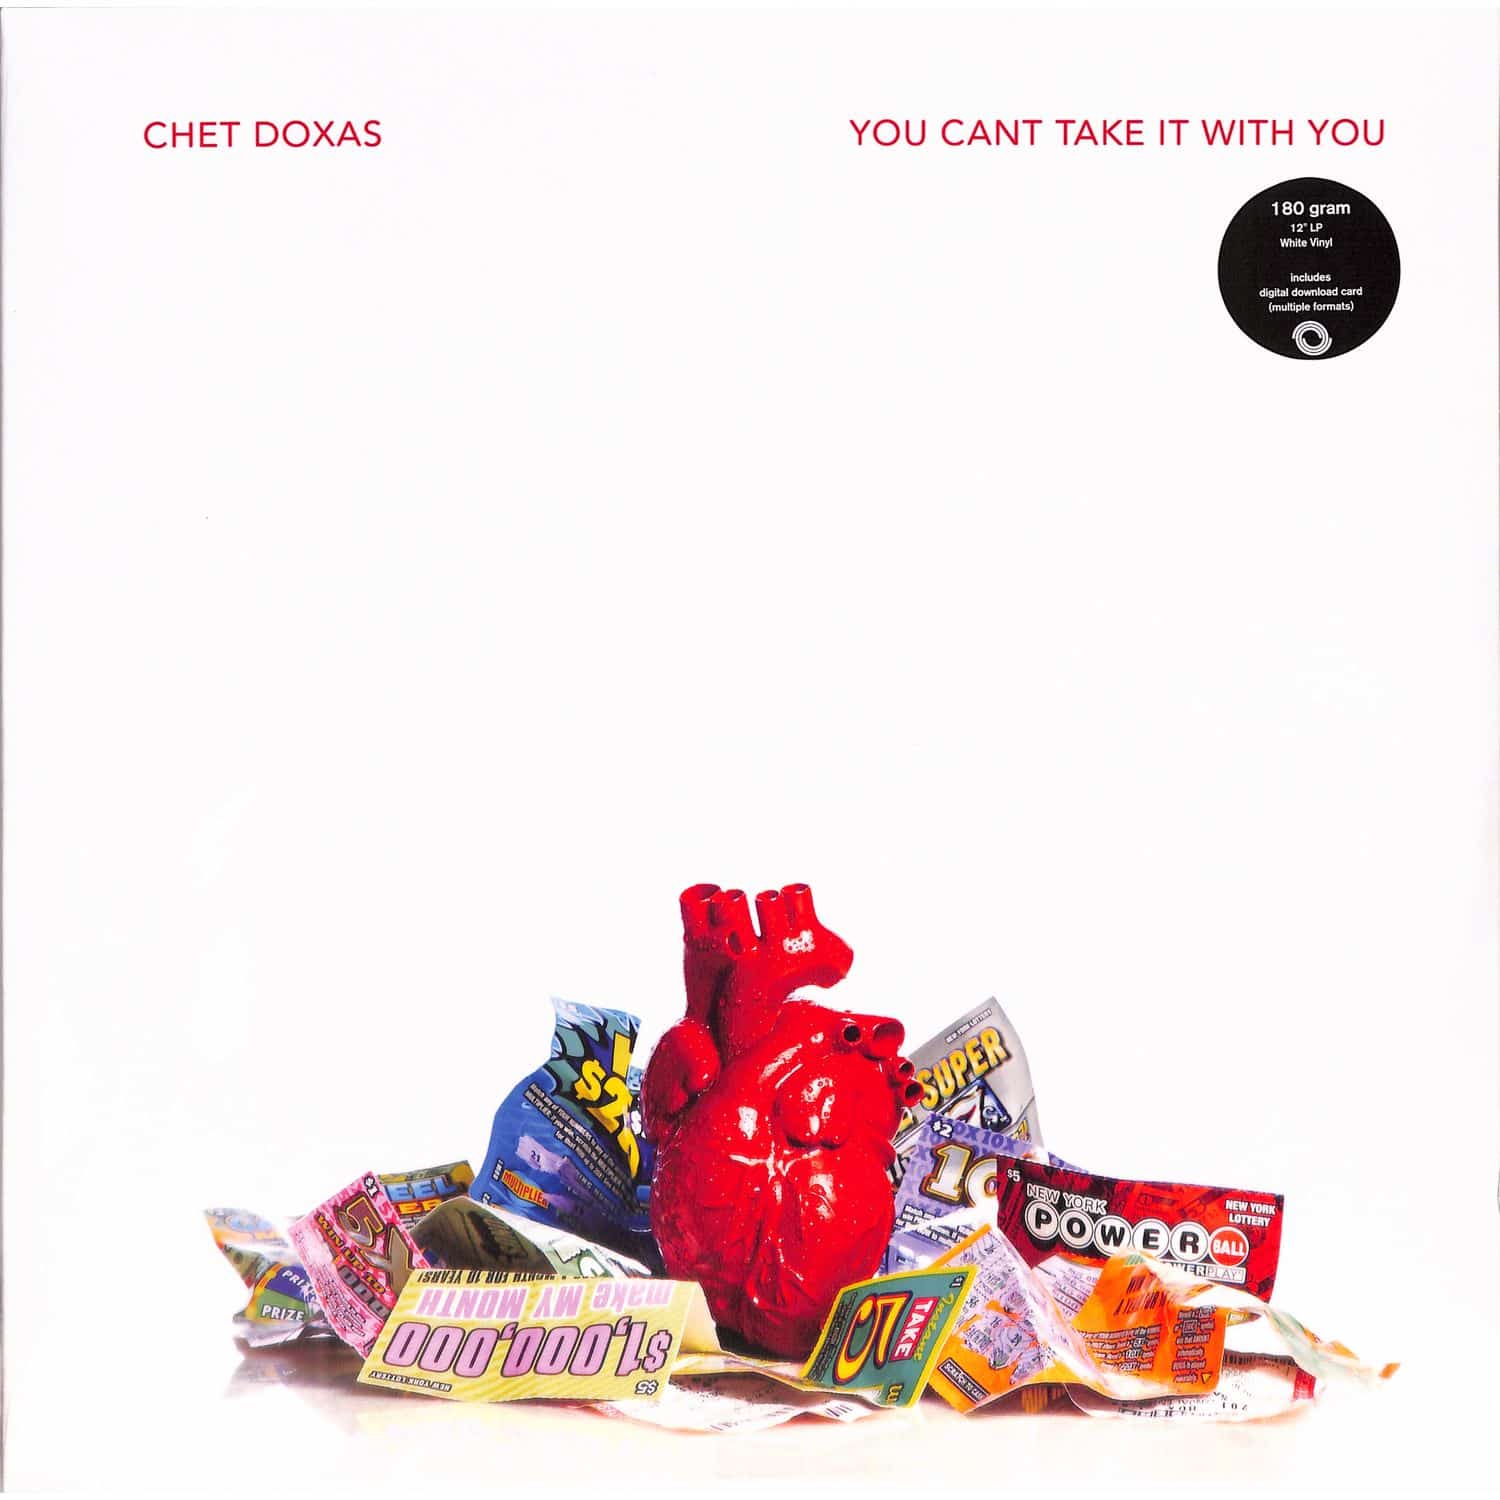 Chet Doxas - YOU CANT TAKE IT WITH YOU 